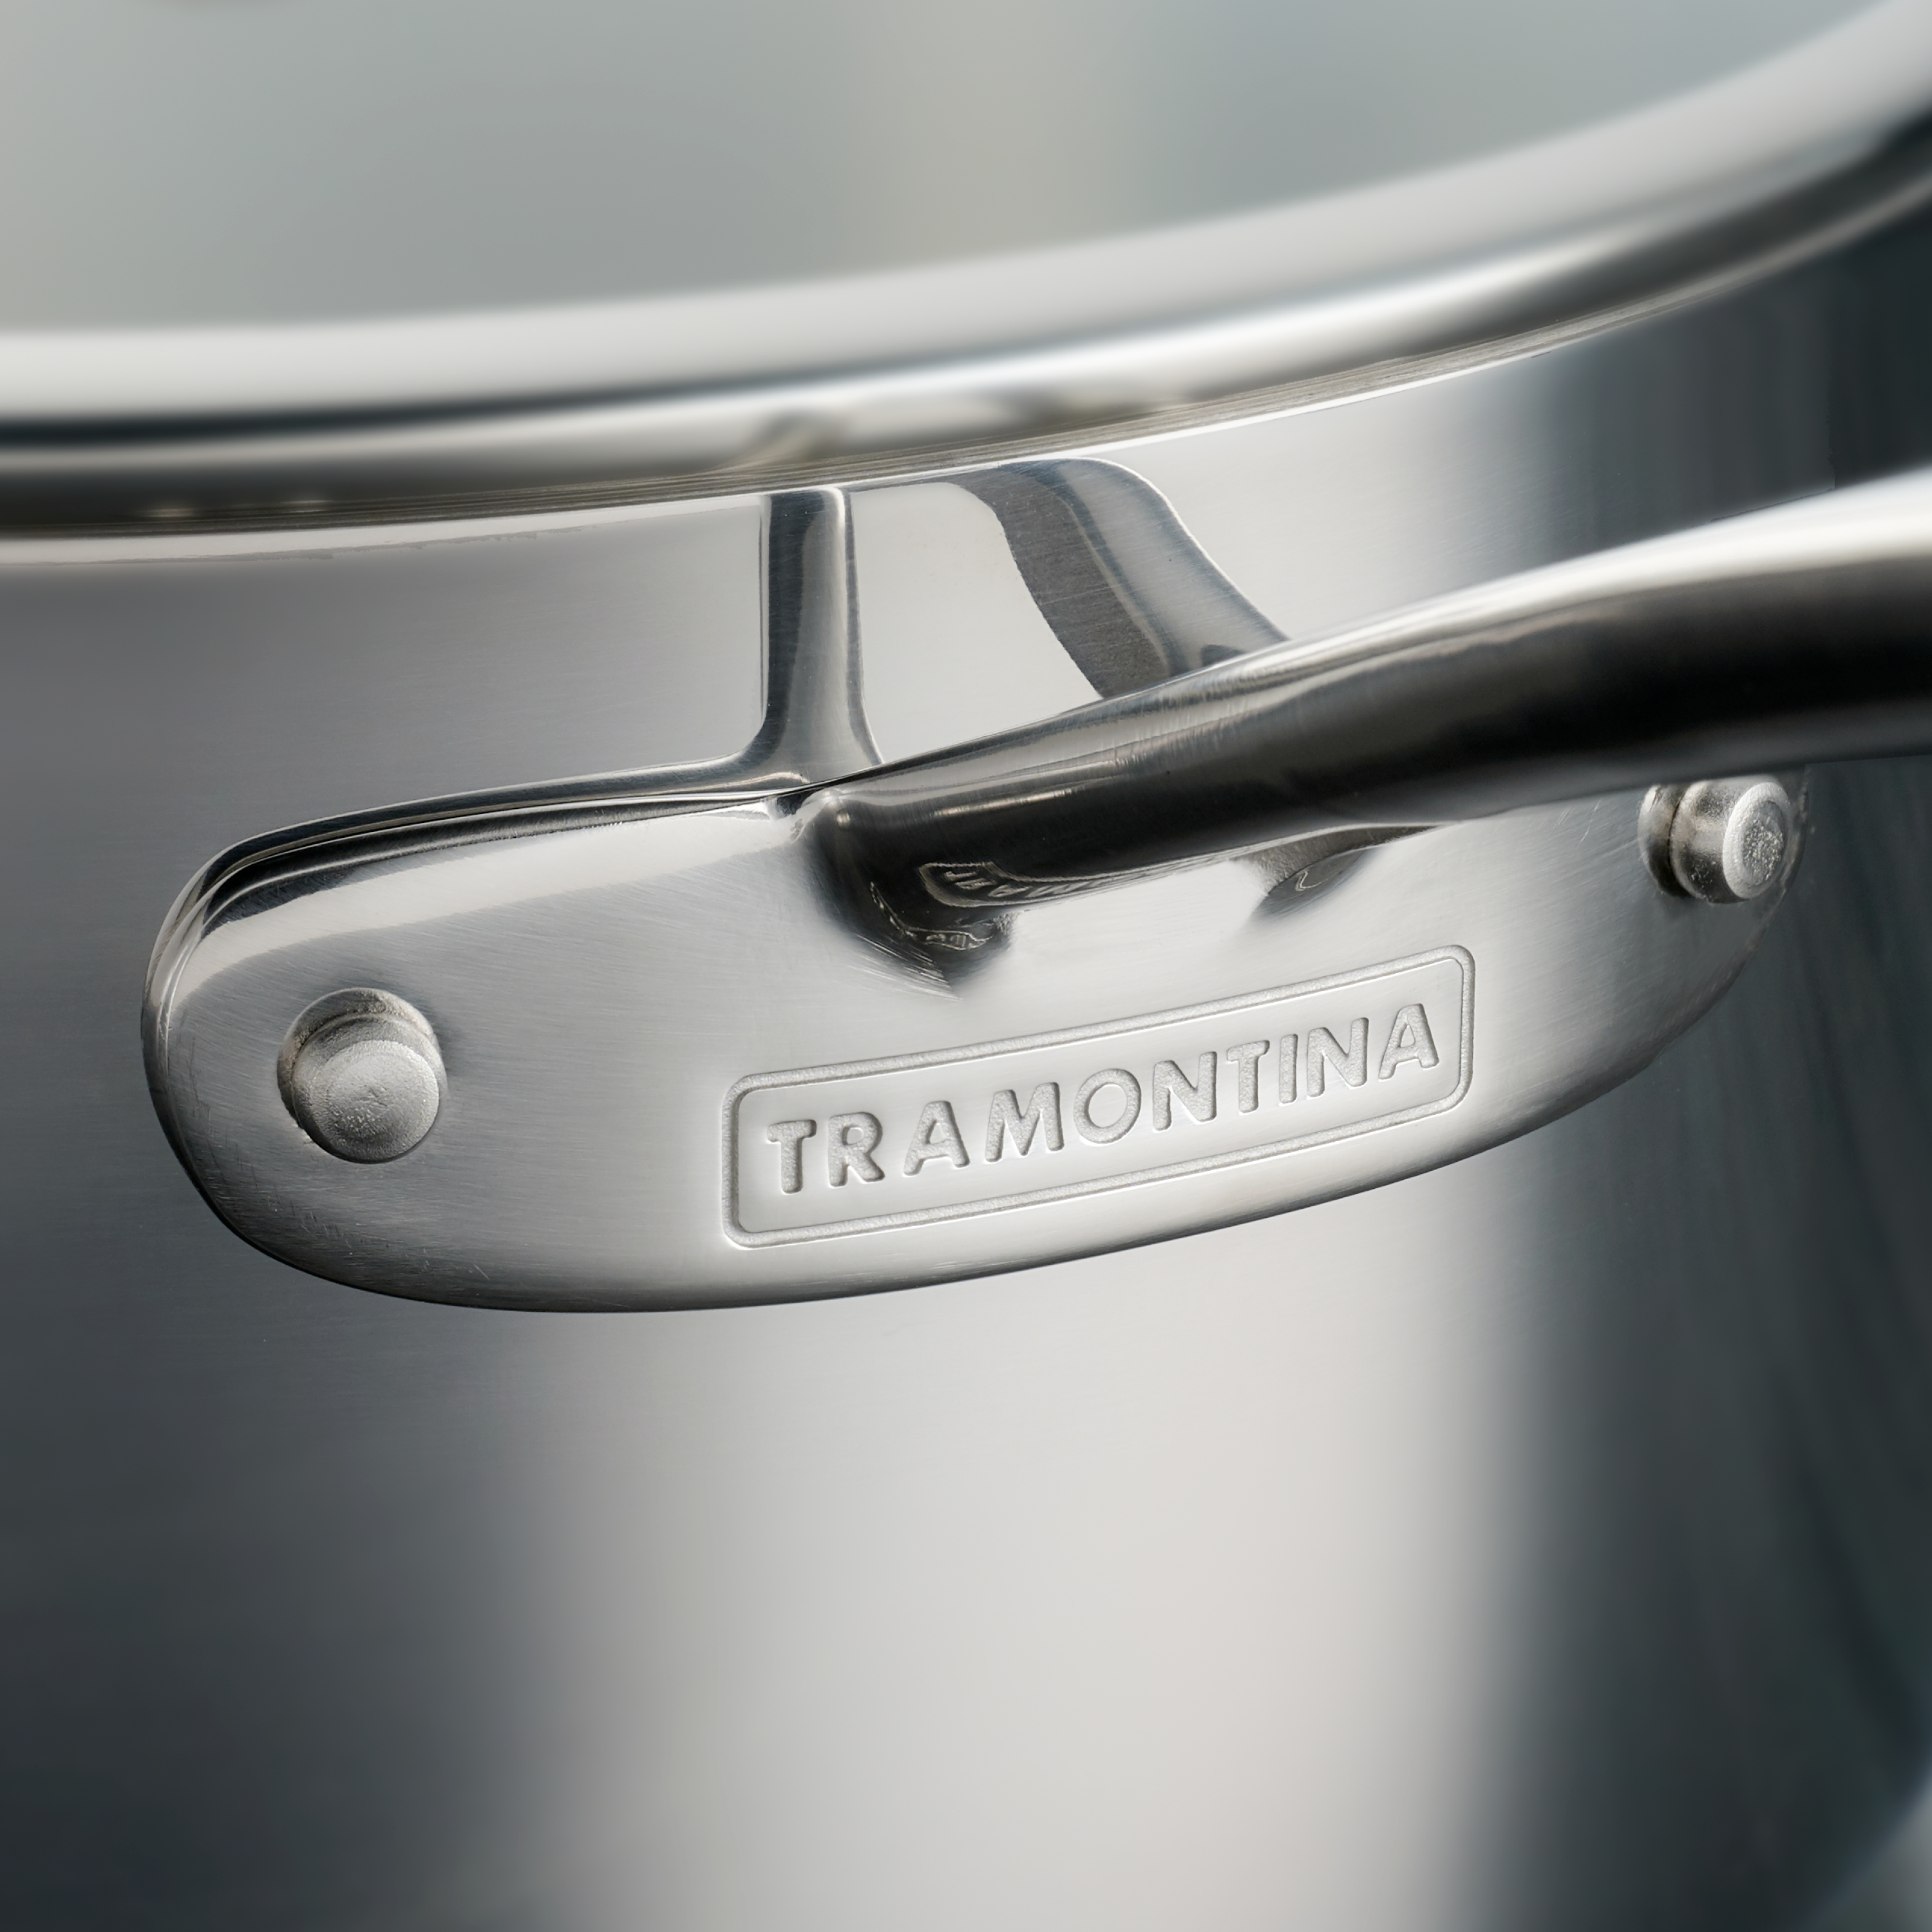 Tramontina 12-Piece Tri-Ply Clad Stainless Steel Cookware Set, with Glass Lids - image 3 of 16